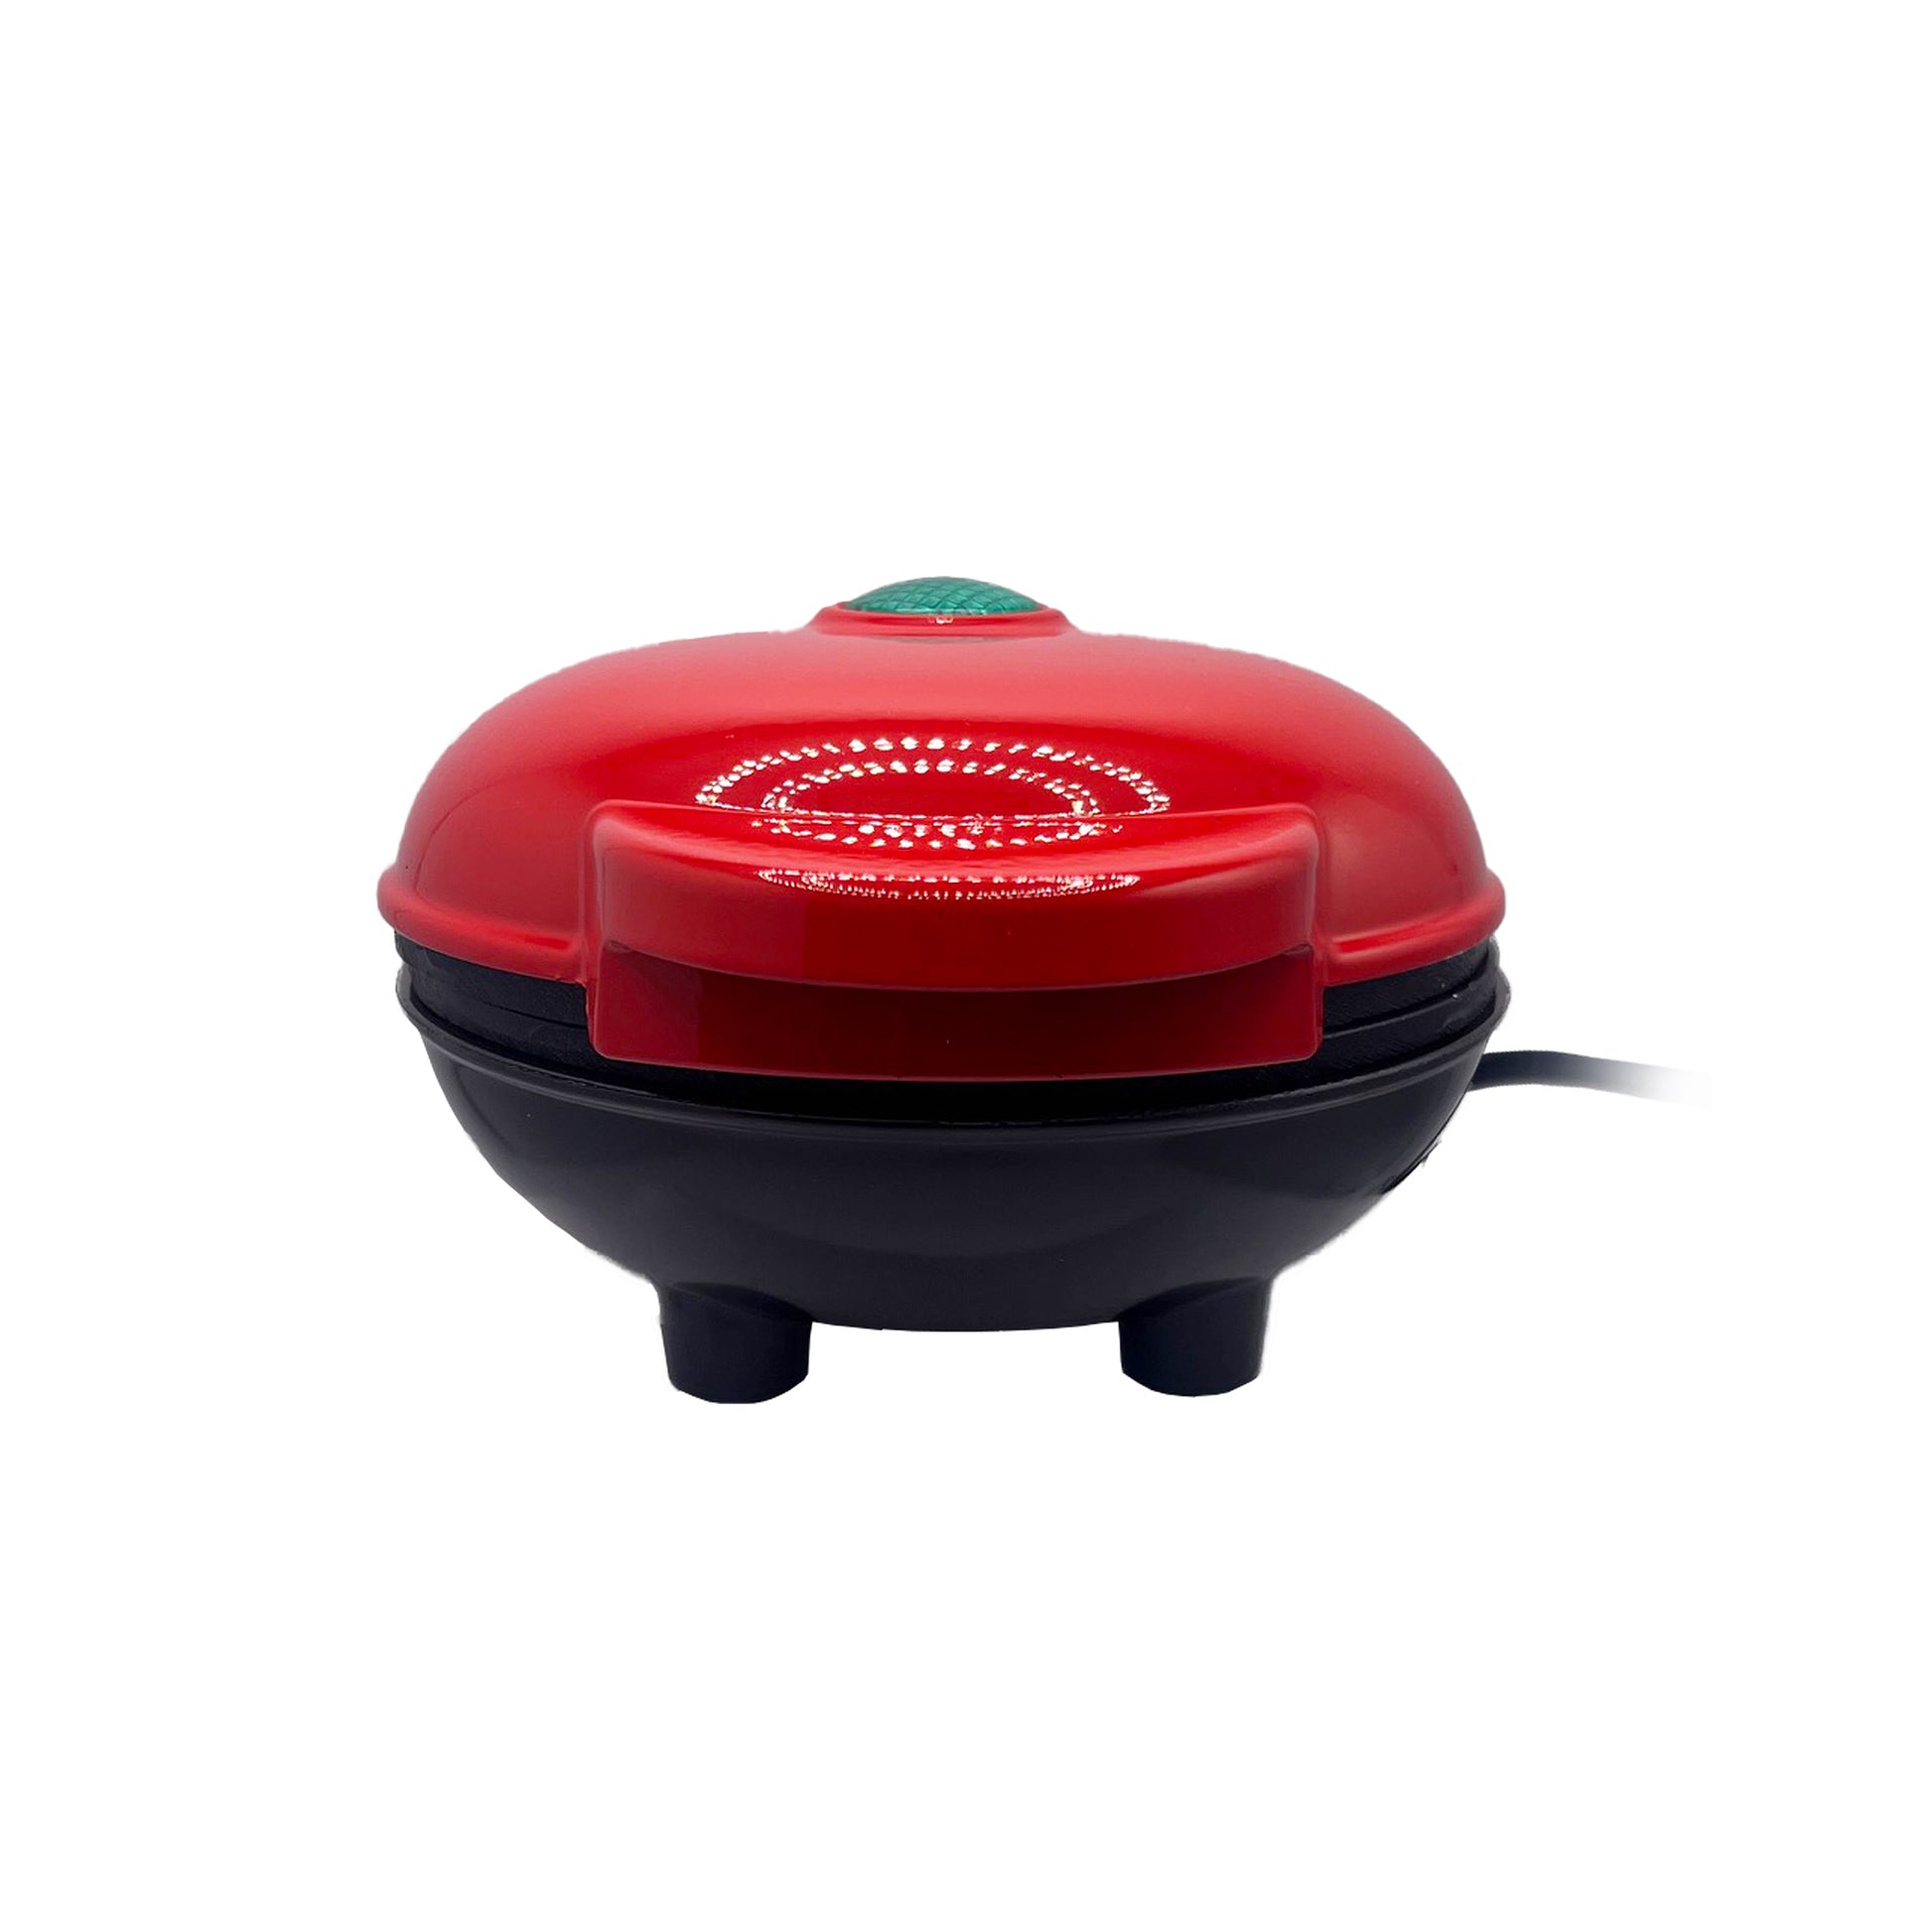 a red and black waffle iron